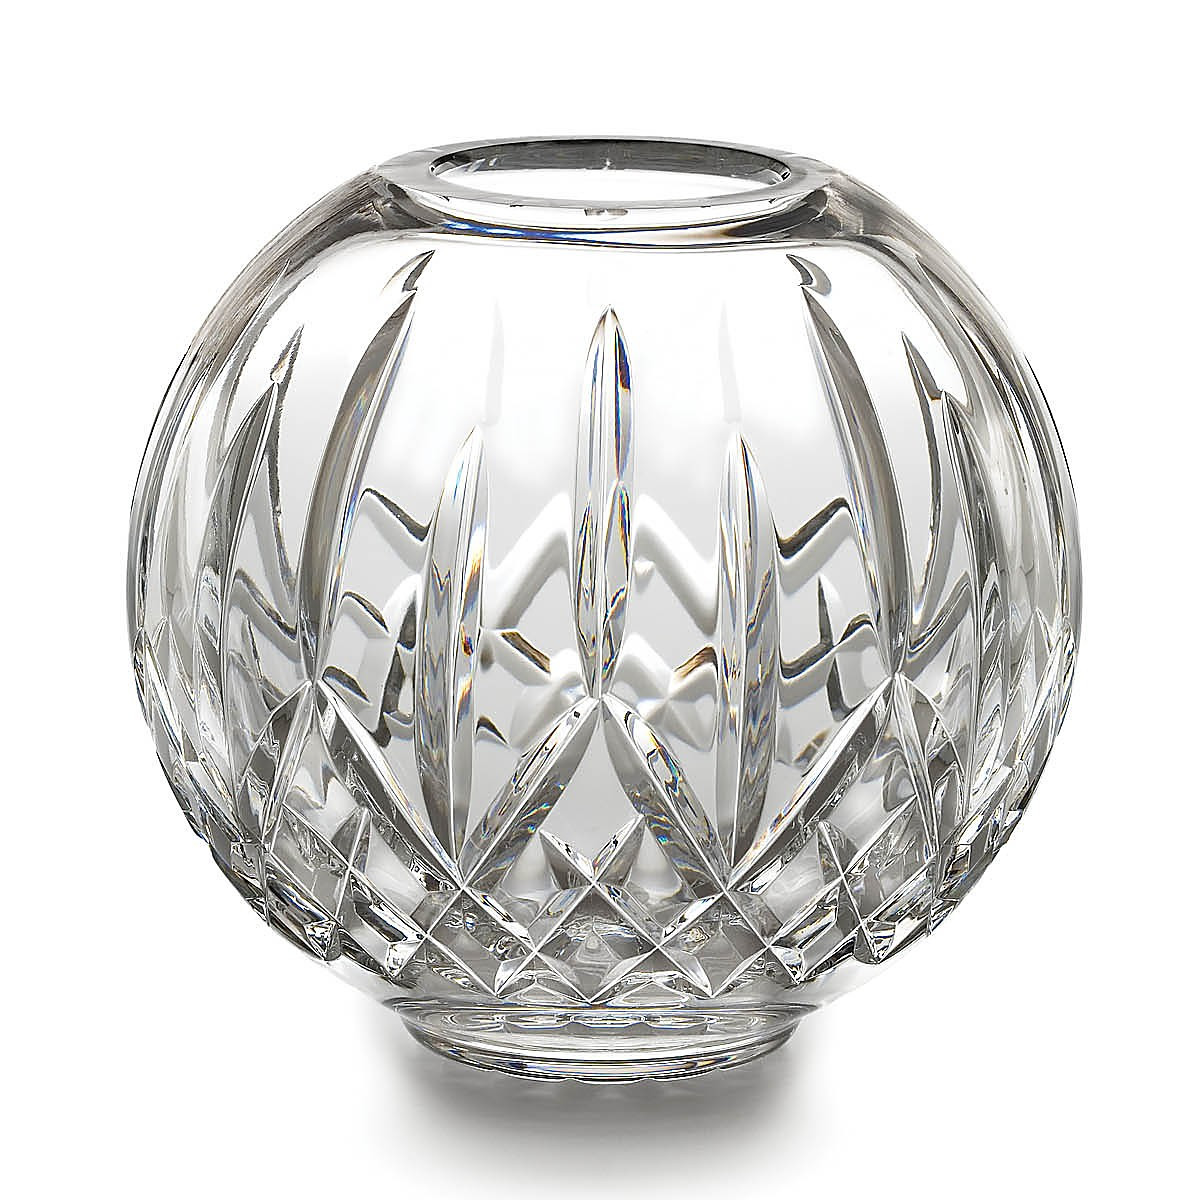 24 attractive Waterford Rose Bowl Vase 2024 free download waterford rose bowl vase of waterford crystal colorful waterford crystal lismore rose bowl throughout waterfordcrystalcolorful waterford crystal lismore rose bowl price 250 00 color crystal